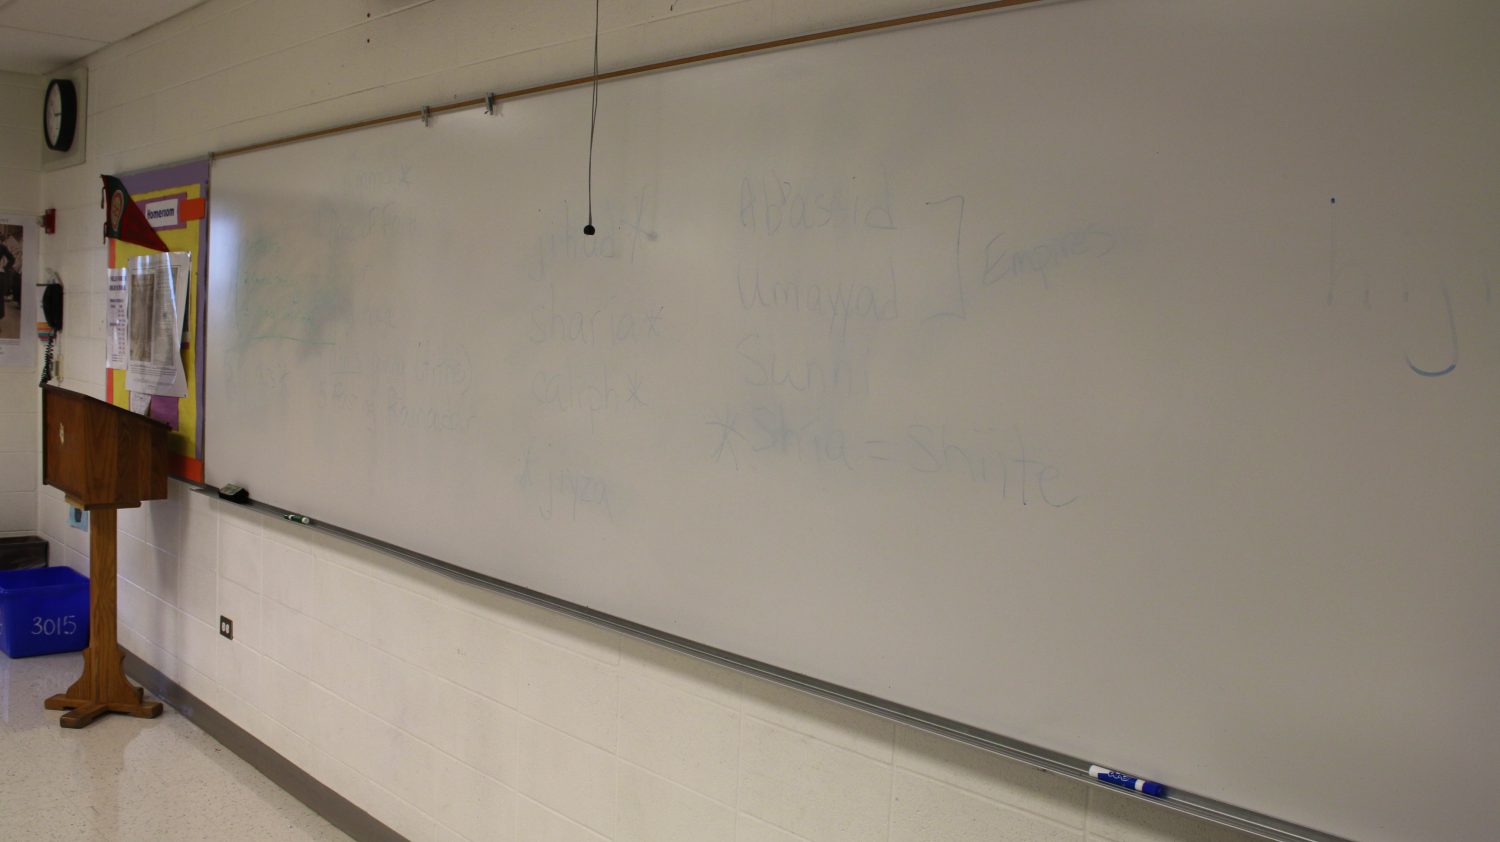 Dysfunctional whiteboard causes knowledge recession